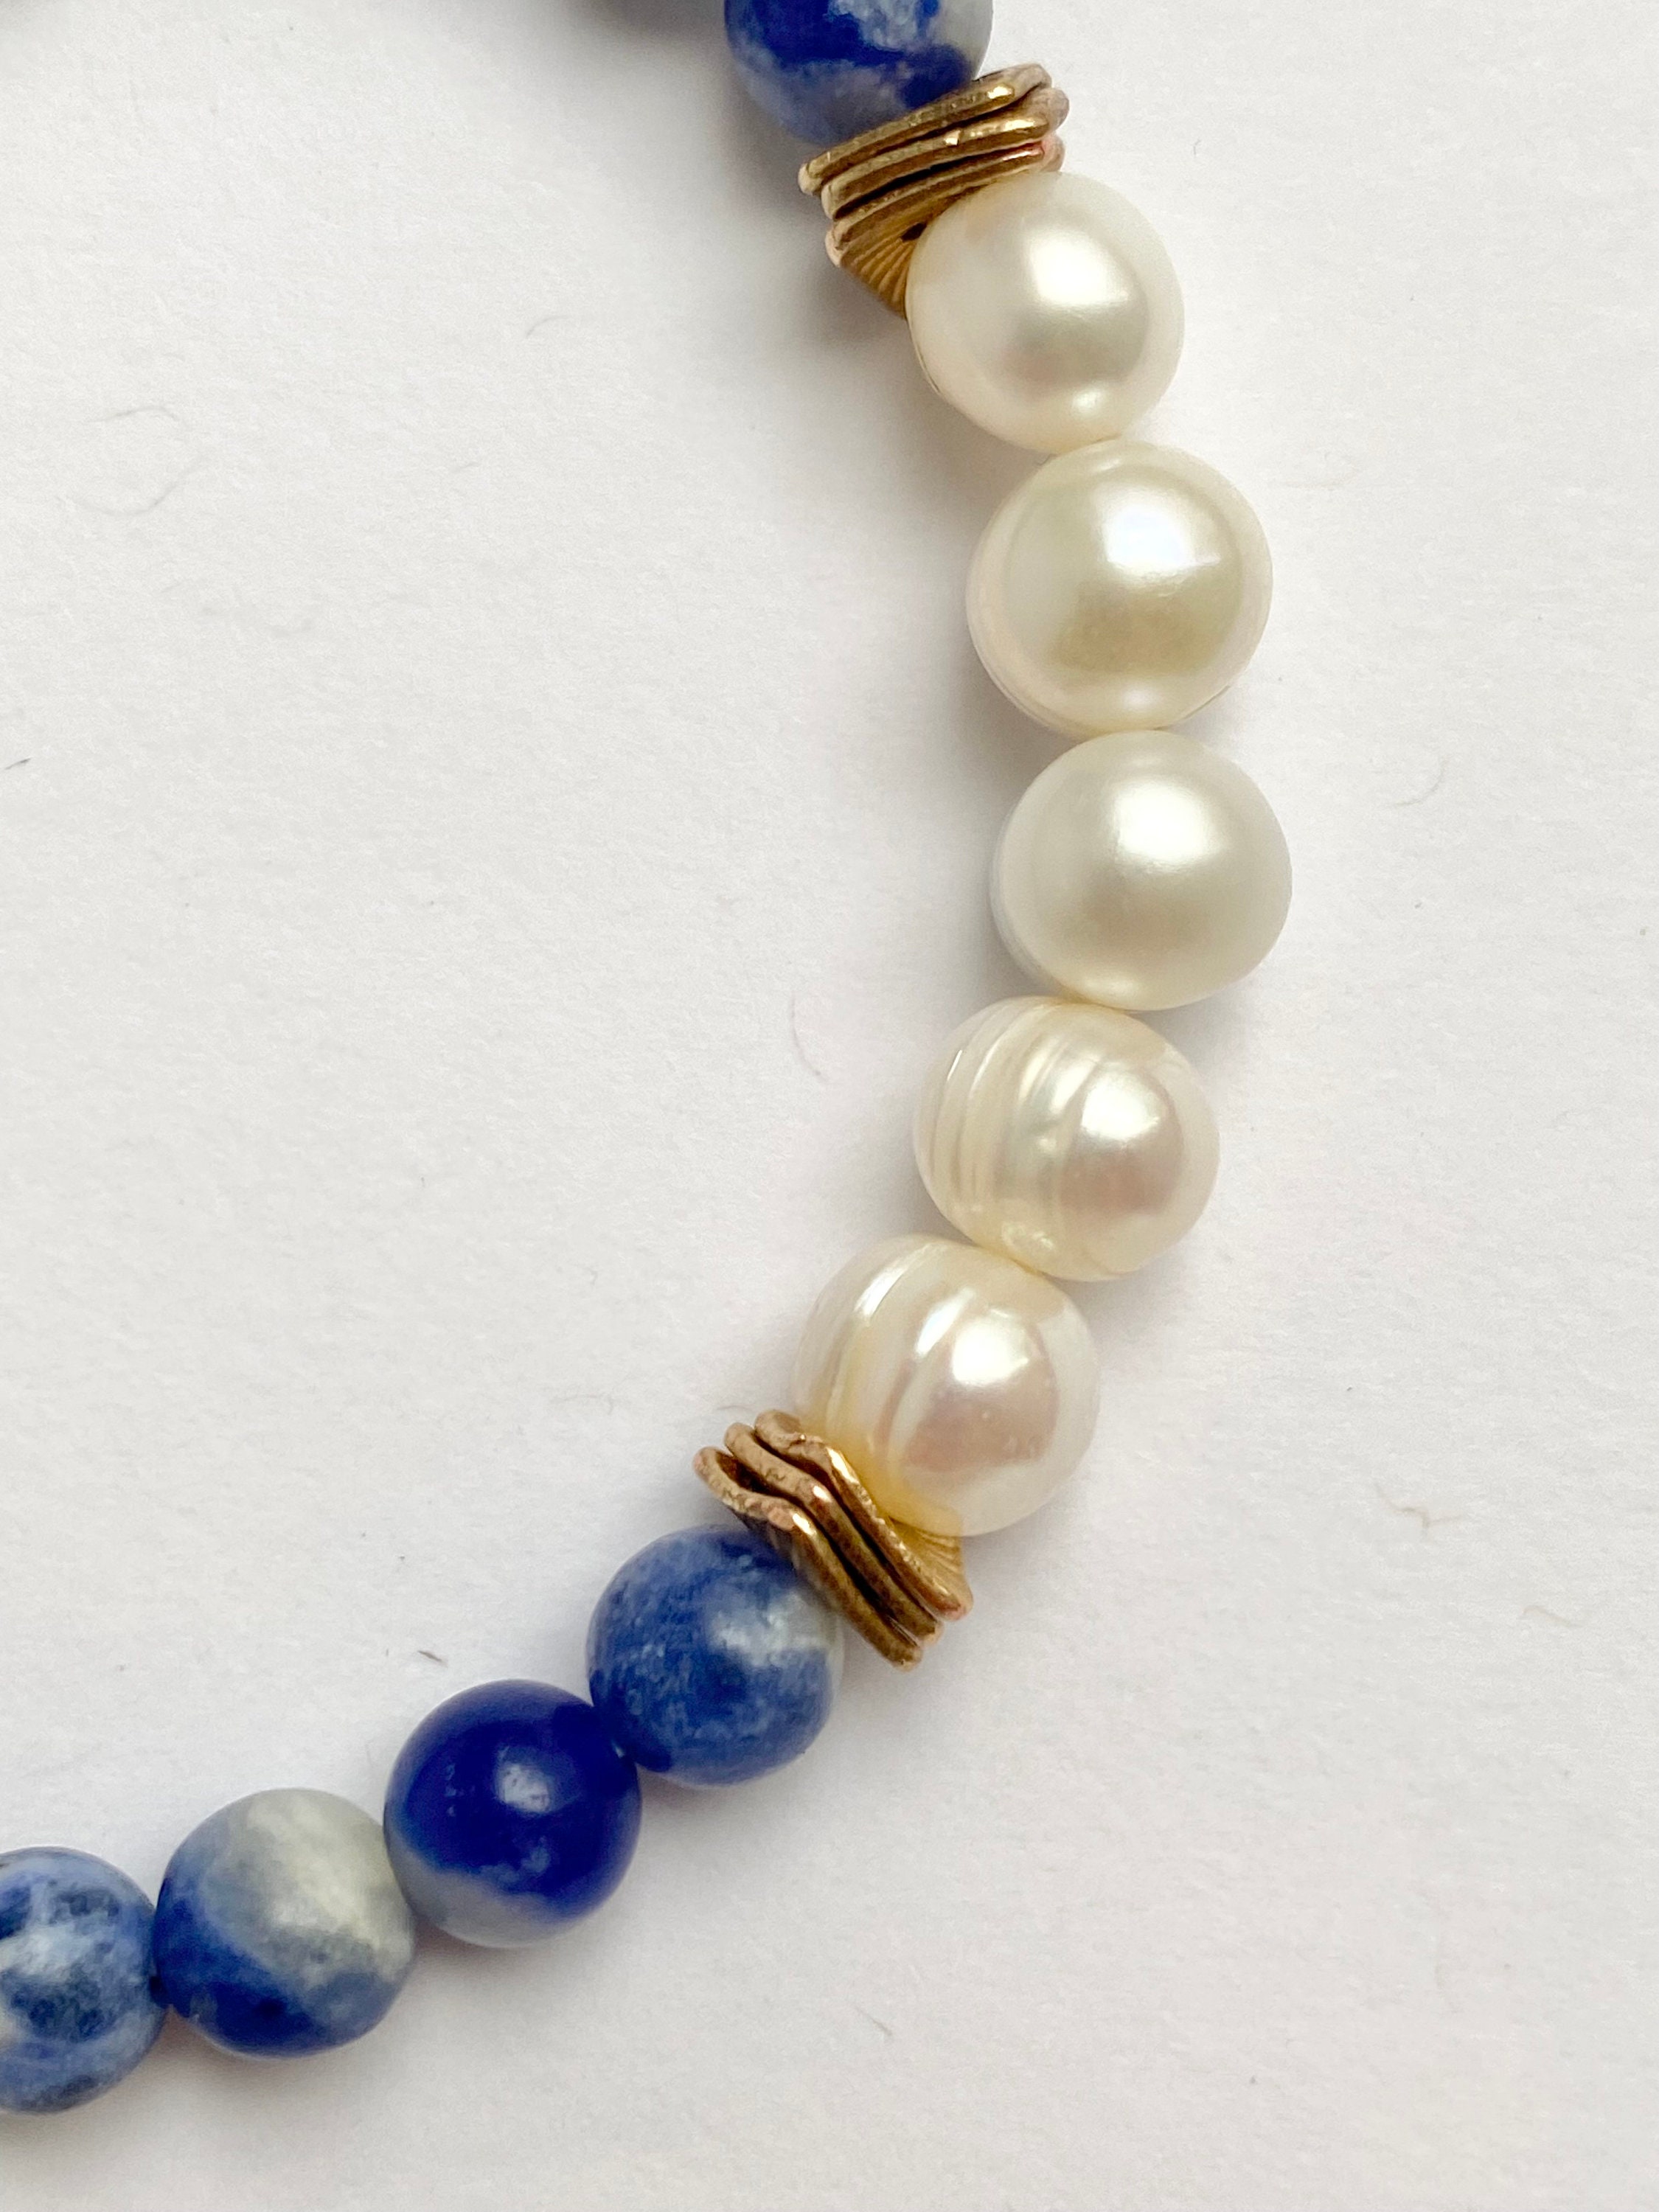 Child's rubber/clay bead bracelet with clasp and nautical charm